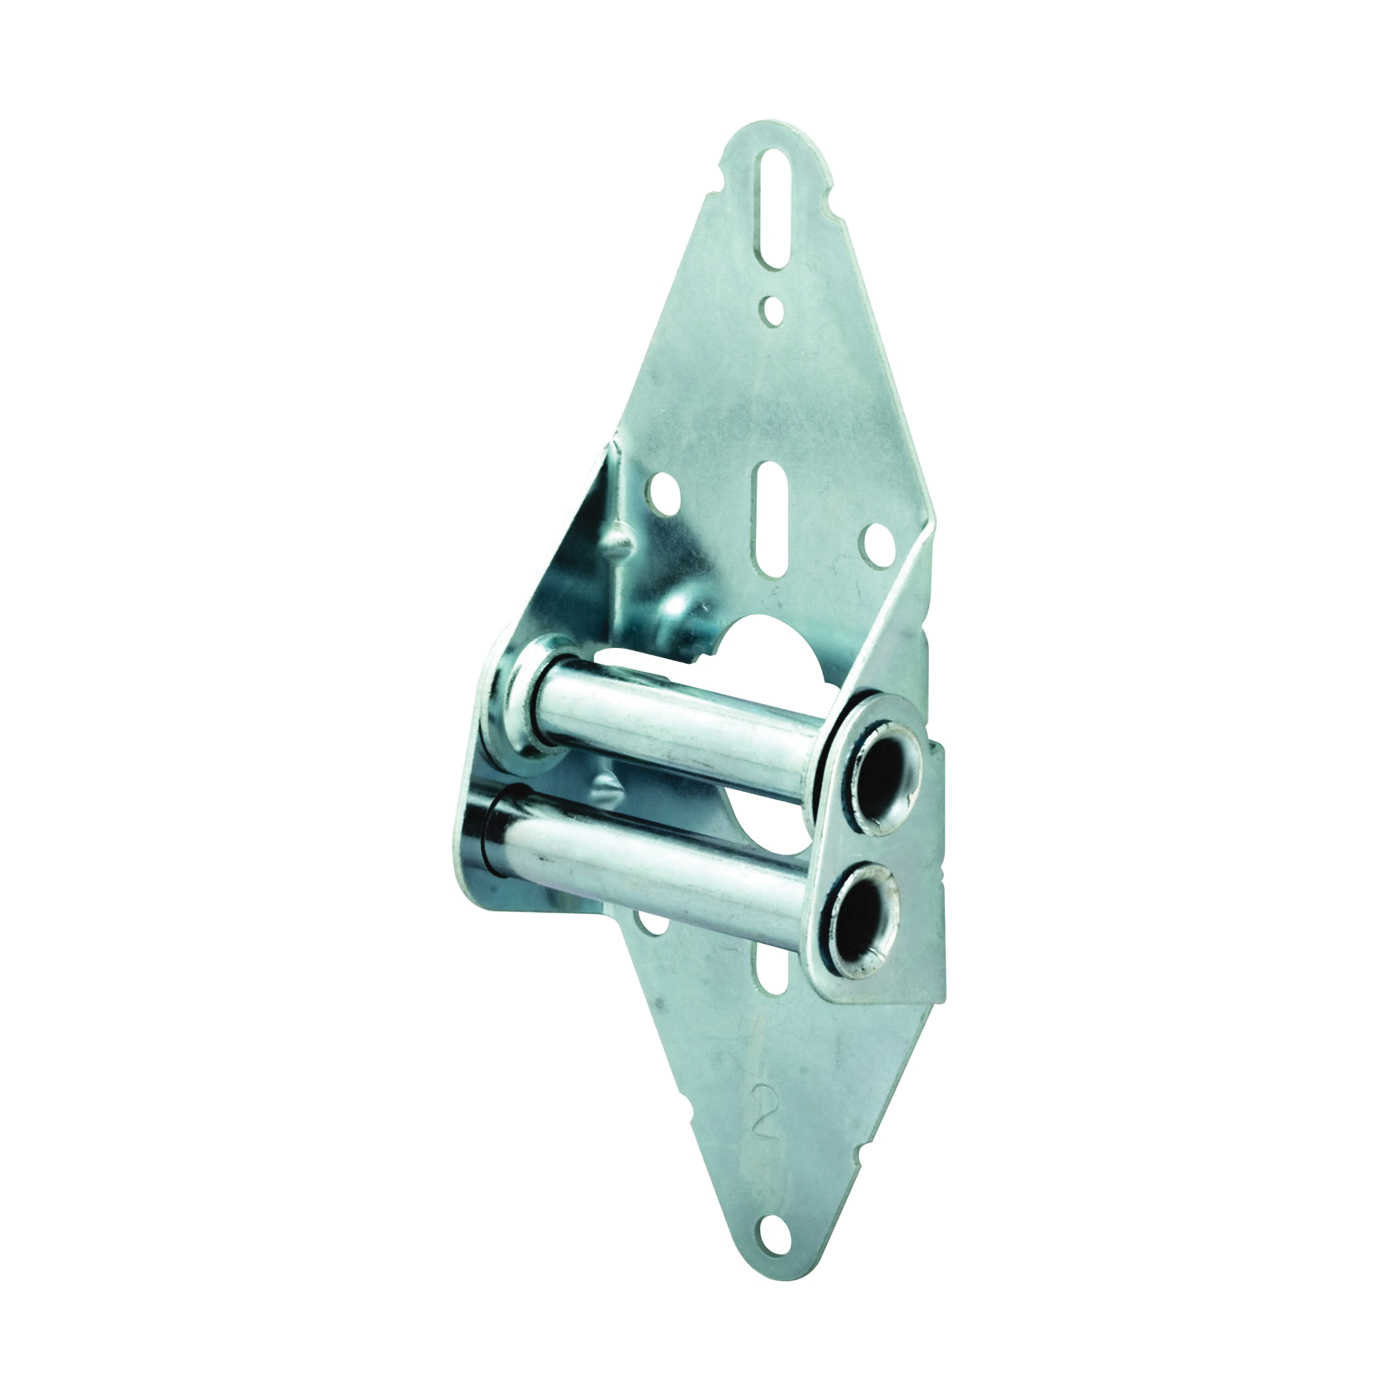 GD 52105 Garage Door Hinge, Steel, Galvanized, Non-Removable Pin, Surface Mounting